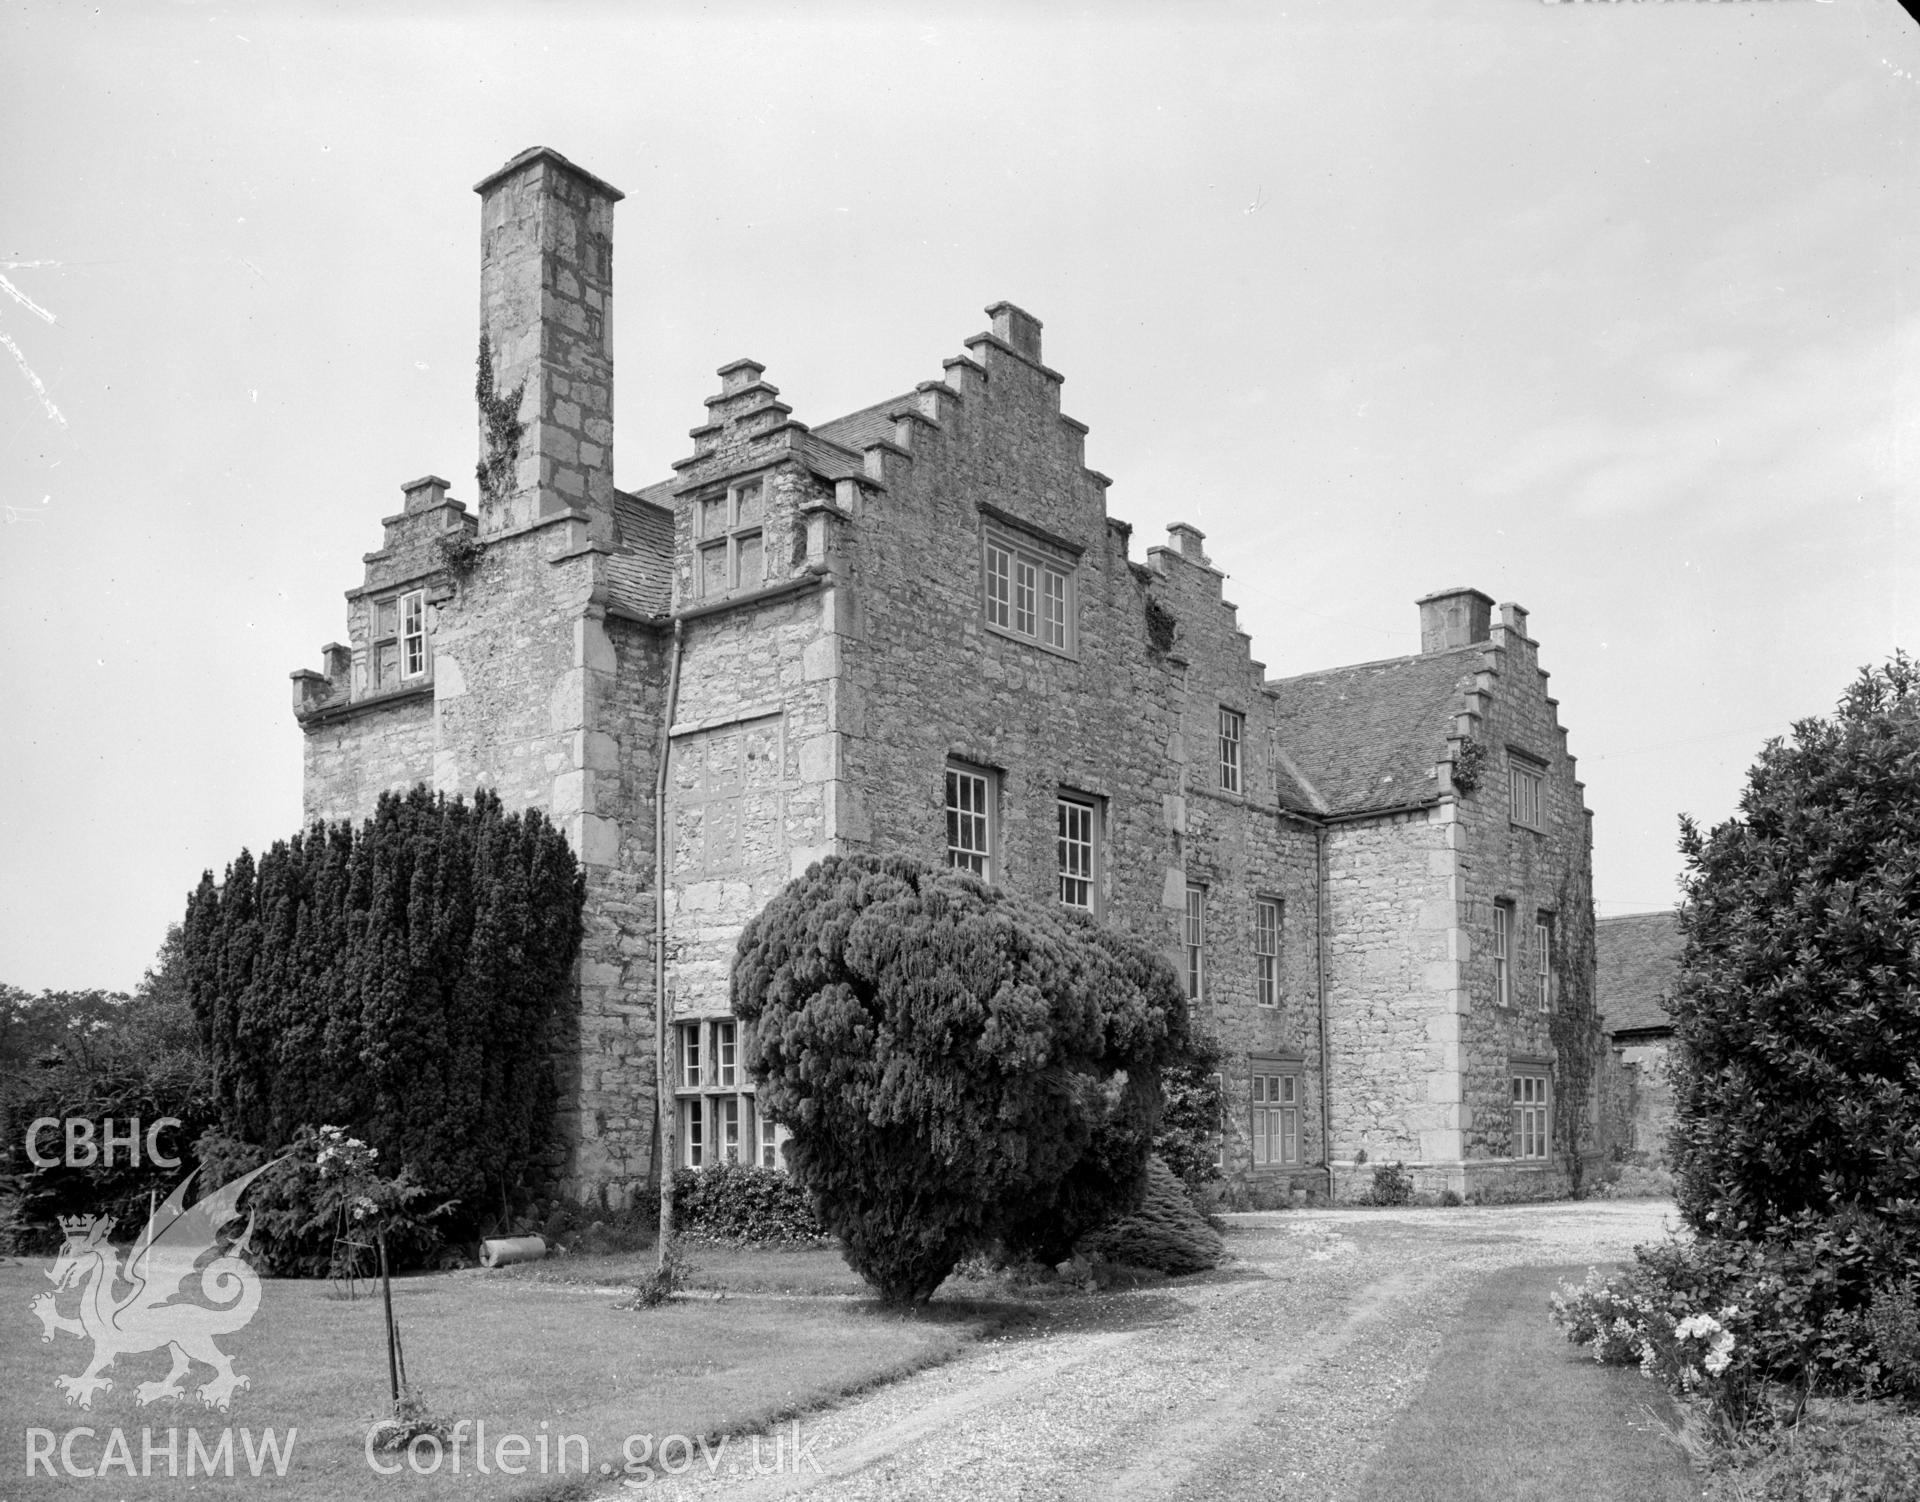 View of a former mansion now farmhouse showing the stepped gables, garden and driveway.